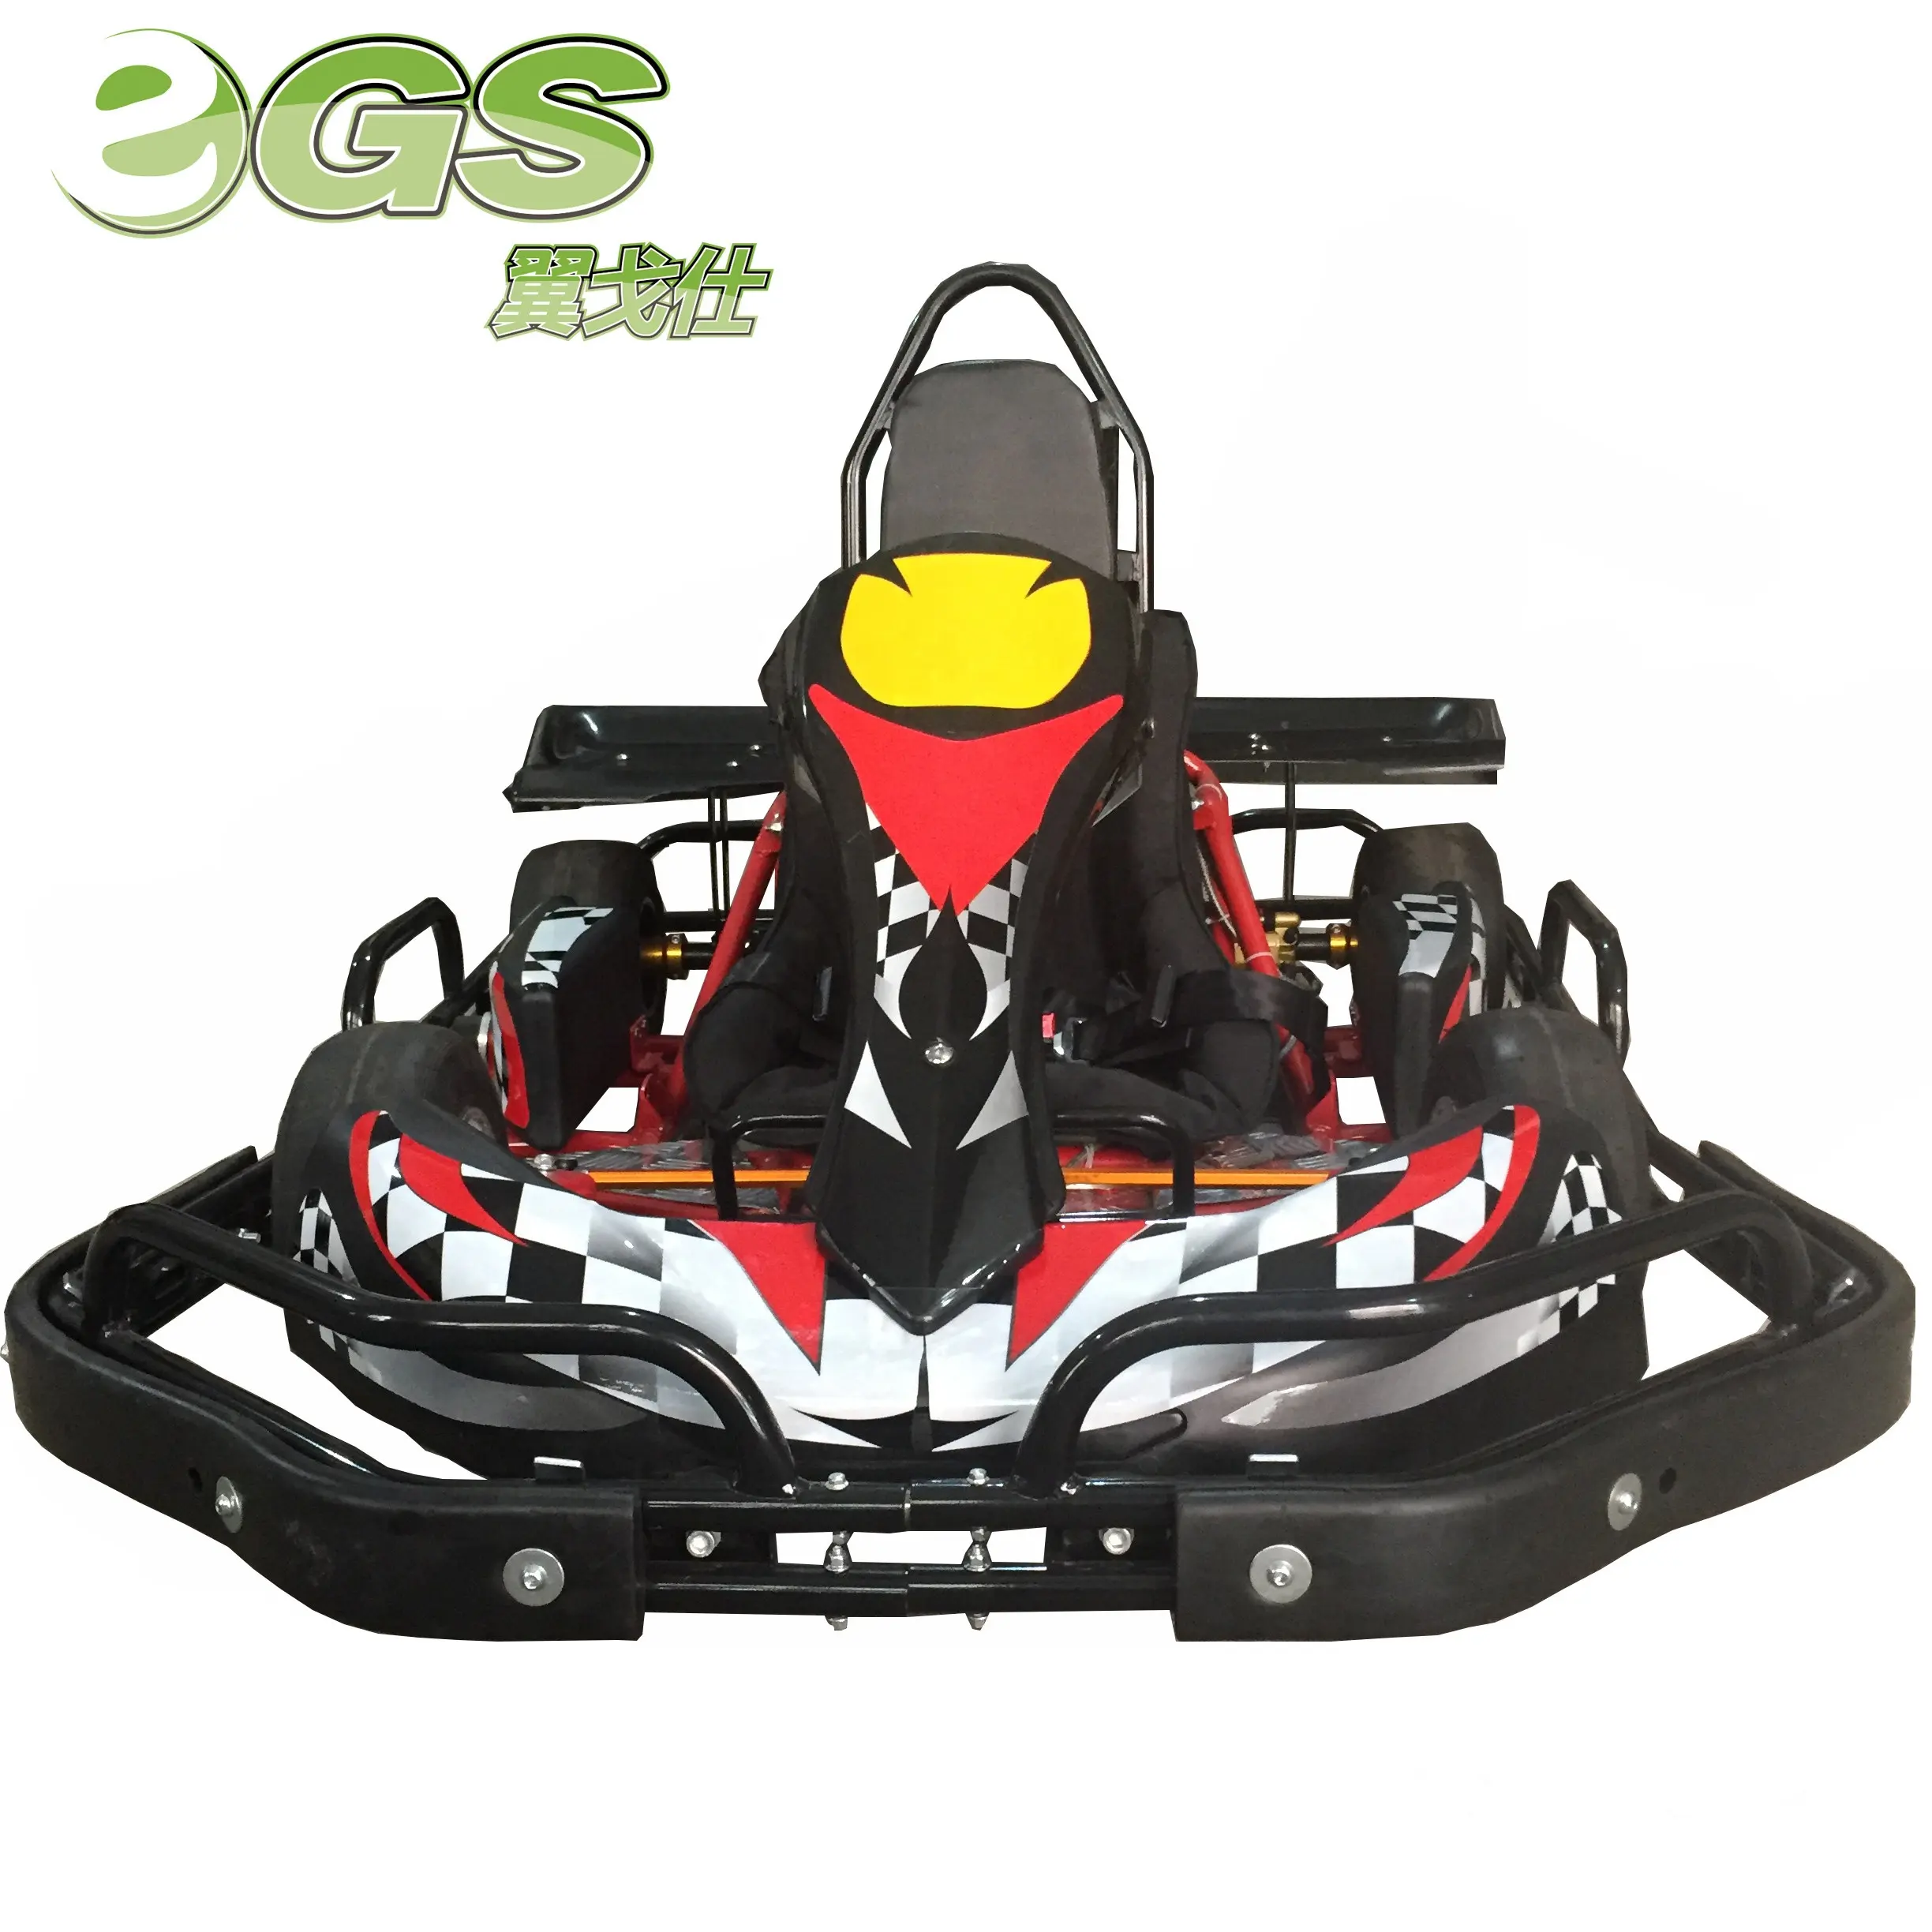 2018 new kids 80cc racing go kart with steel safety bumper pass CE certificate hot on sale